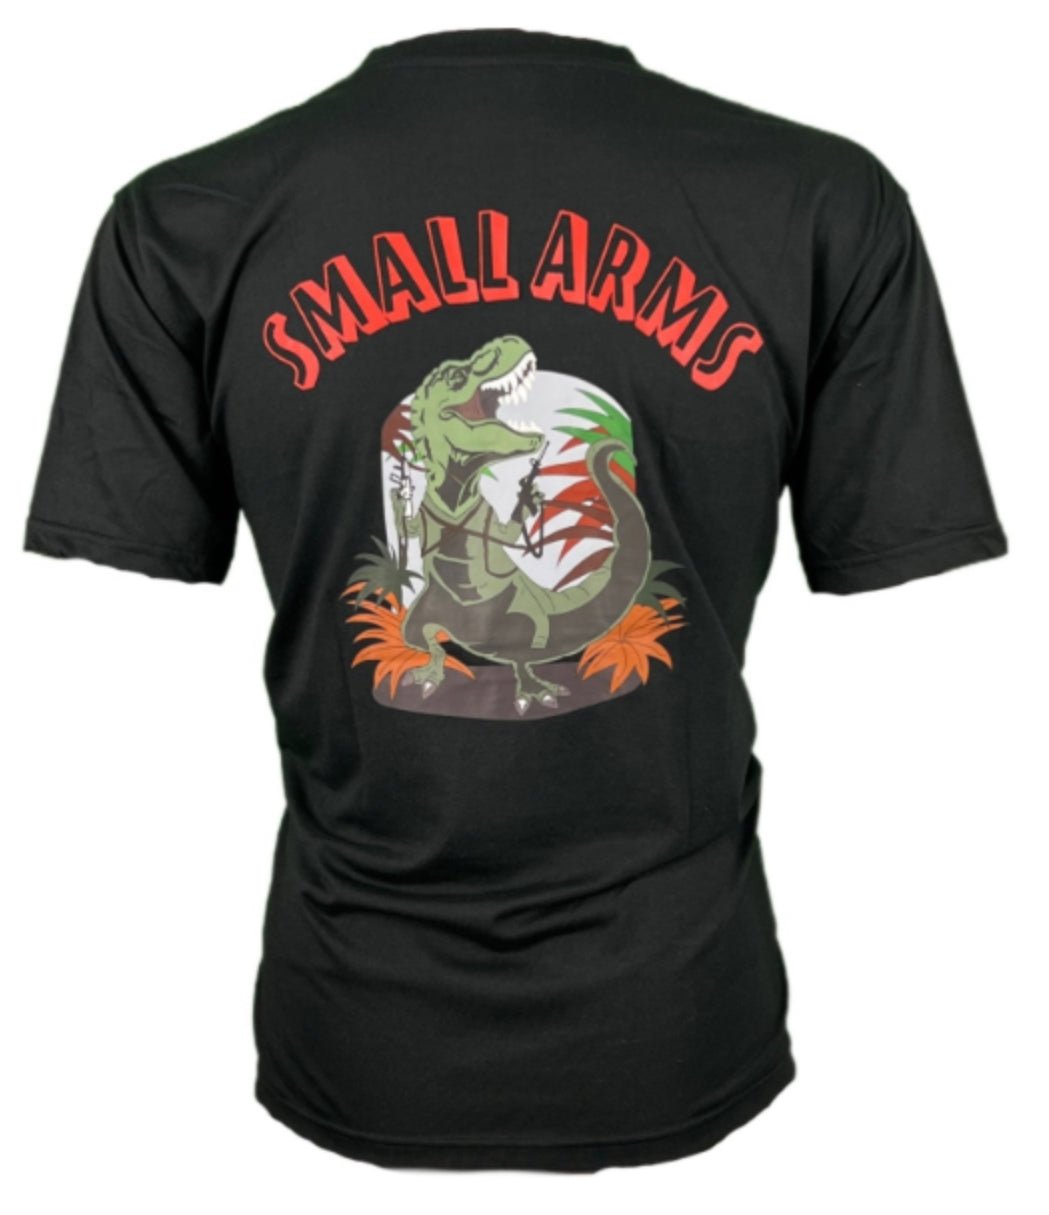 SMALL ARMS 2A FIREARMS TREX SHIRT - BLACK - ALPHAunleashed